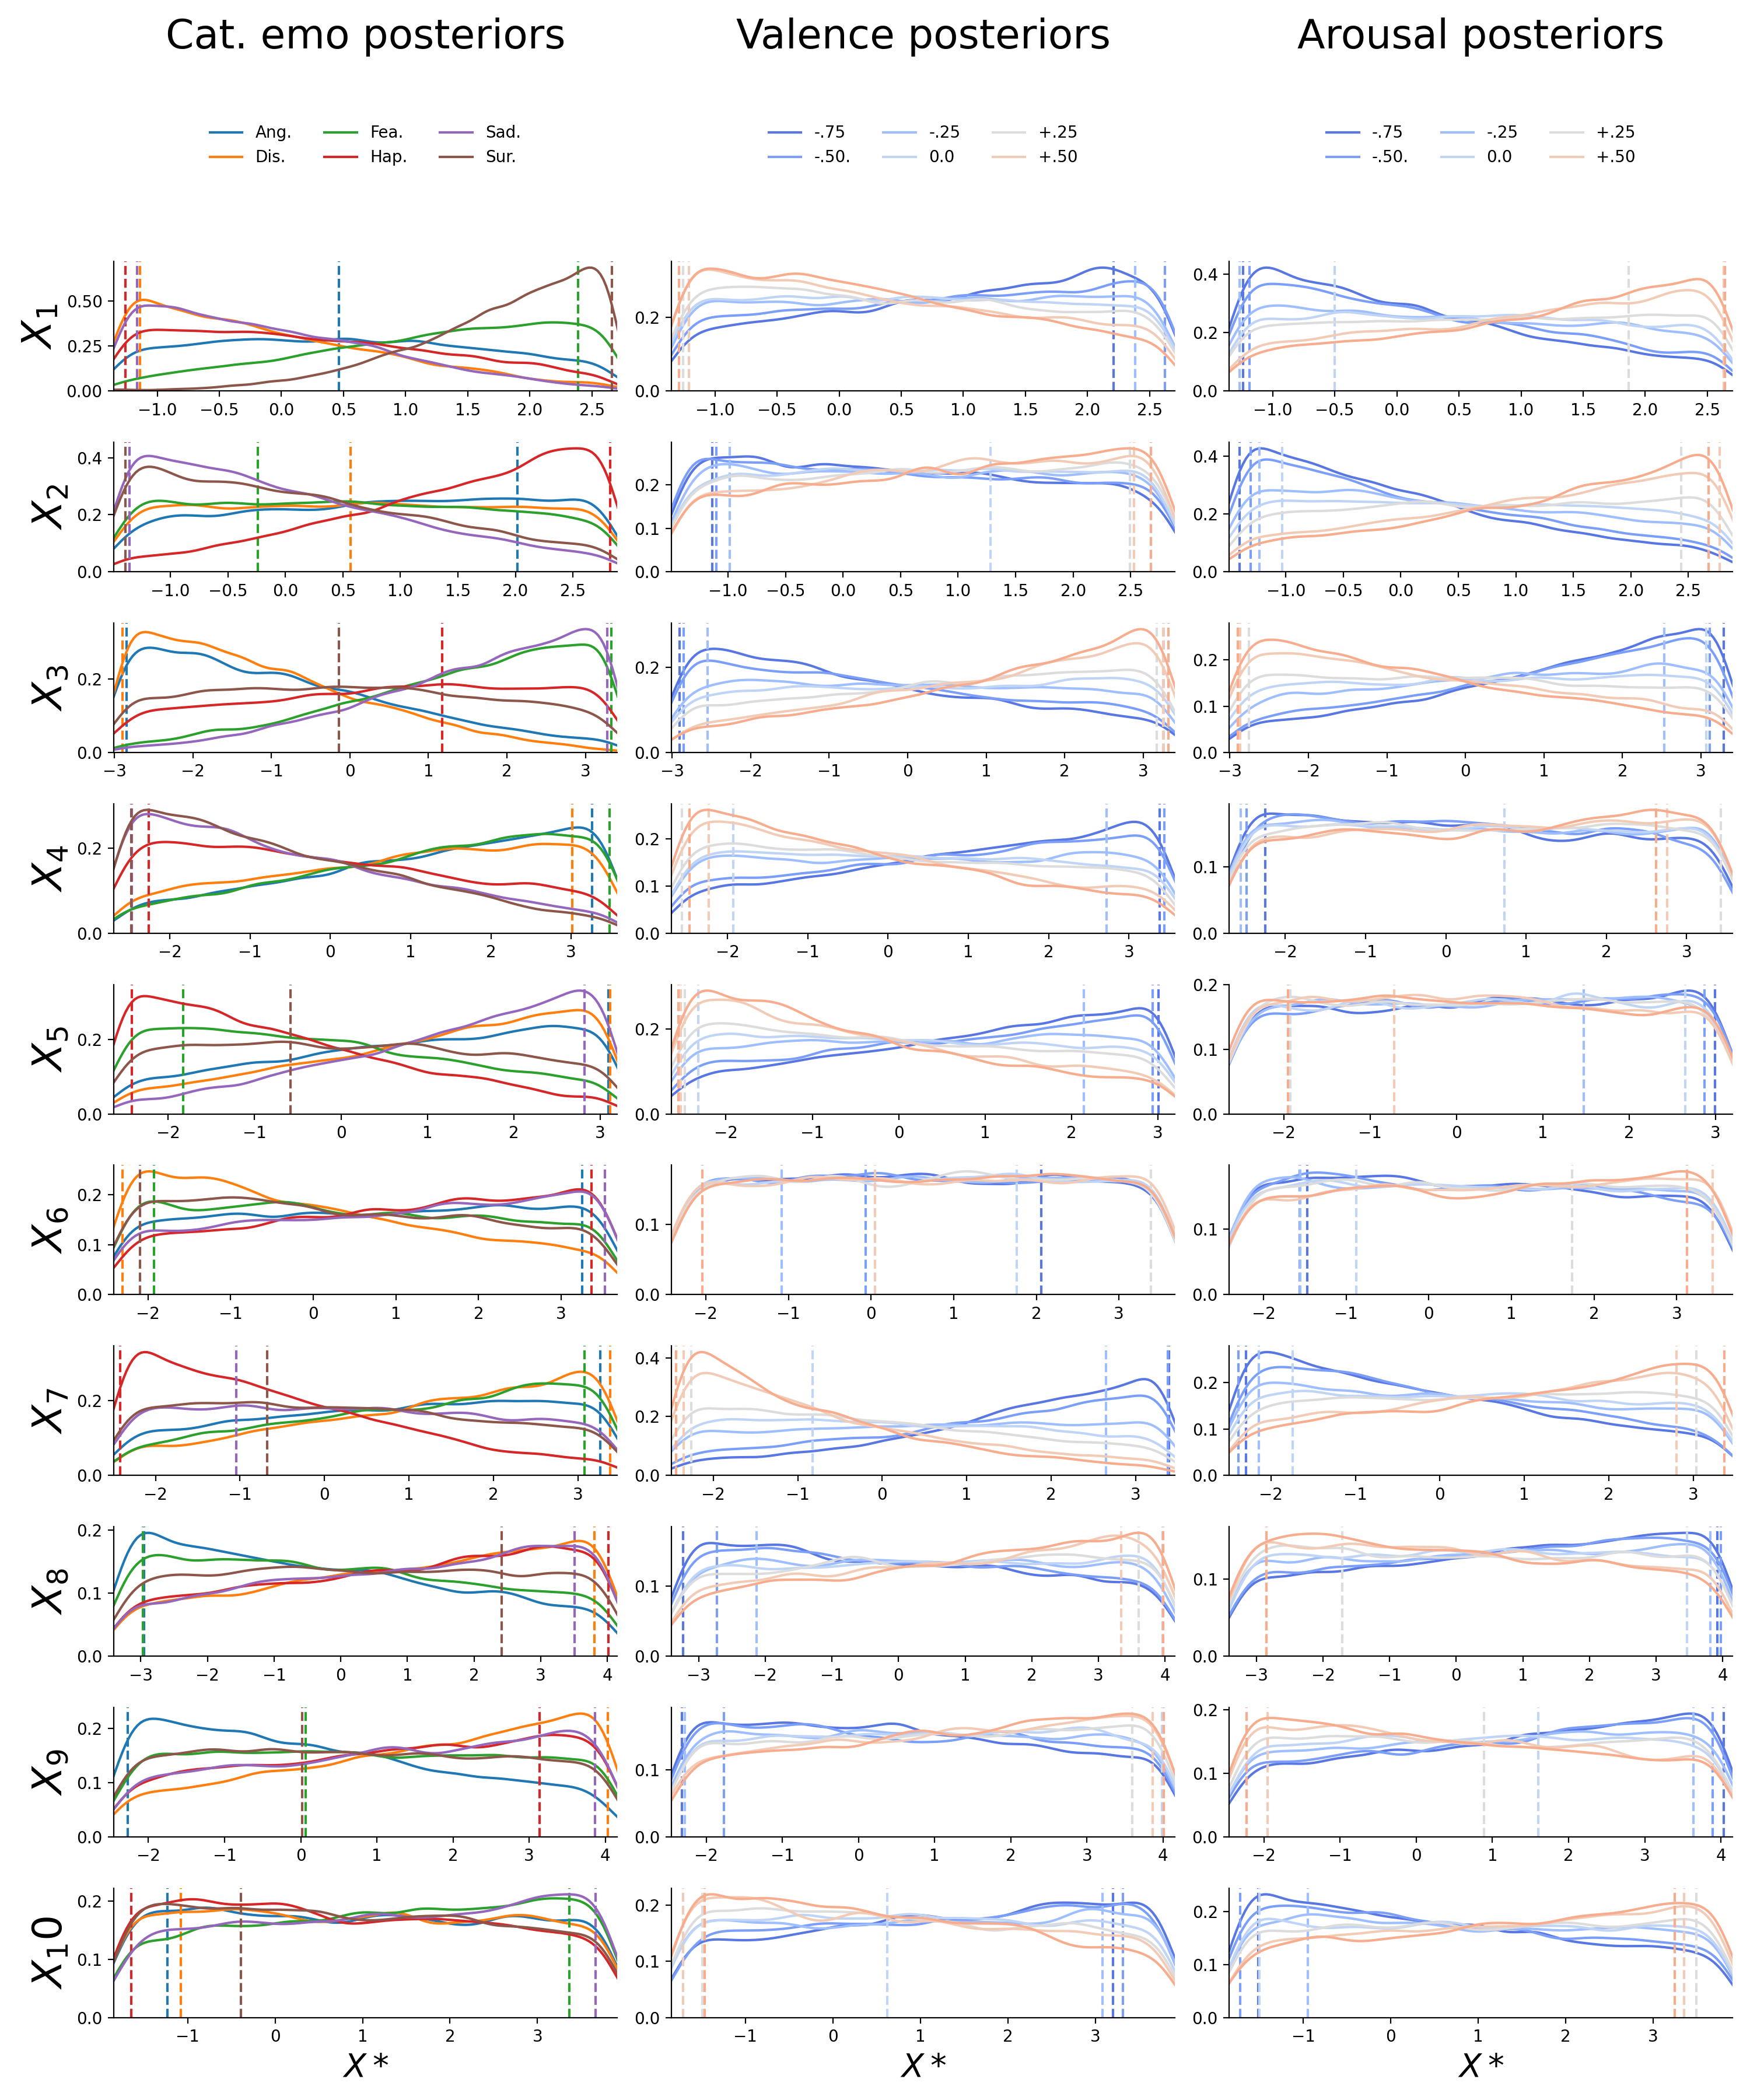 Posterior distributions for the first ten dynamic features (\(X_{1}-X_{10}\); in rows) for the inverted categorical emotion model (left; different emotions as separate lines), the inverted valence model (middle; different levels as separate lines), and the inverted arousal model (right; different levels as separate lines). The dashed vertical lines represent the value chosen for the reconstructions (i.e., the midpoint of the 5% HDI interval). The drop at the edges of the posterior is an artifact induced by the kernel density estimation.